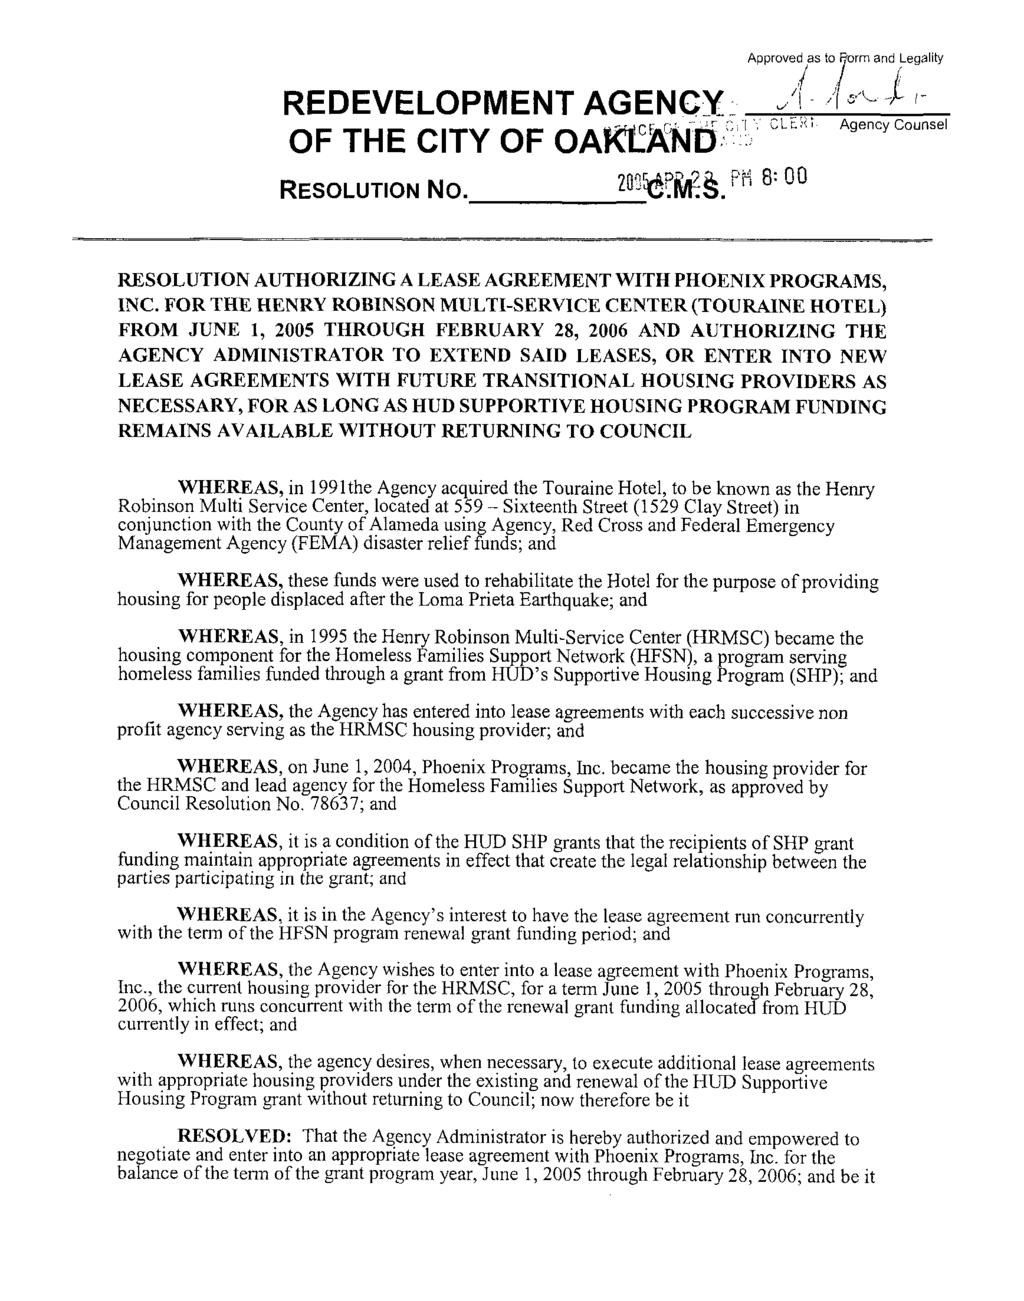 REDEVELOPMENT AGENCY OF THE CITY OF OAfCOftlD RESOLUTION NO. 203^2;. PH 8= 00 Approved as to Borm and Legality RESOLUTION AUTHORIZING A LEASE AGREEMENT WITH PHOENIX PROGRAMS, INC.